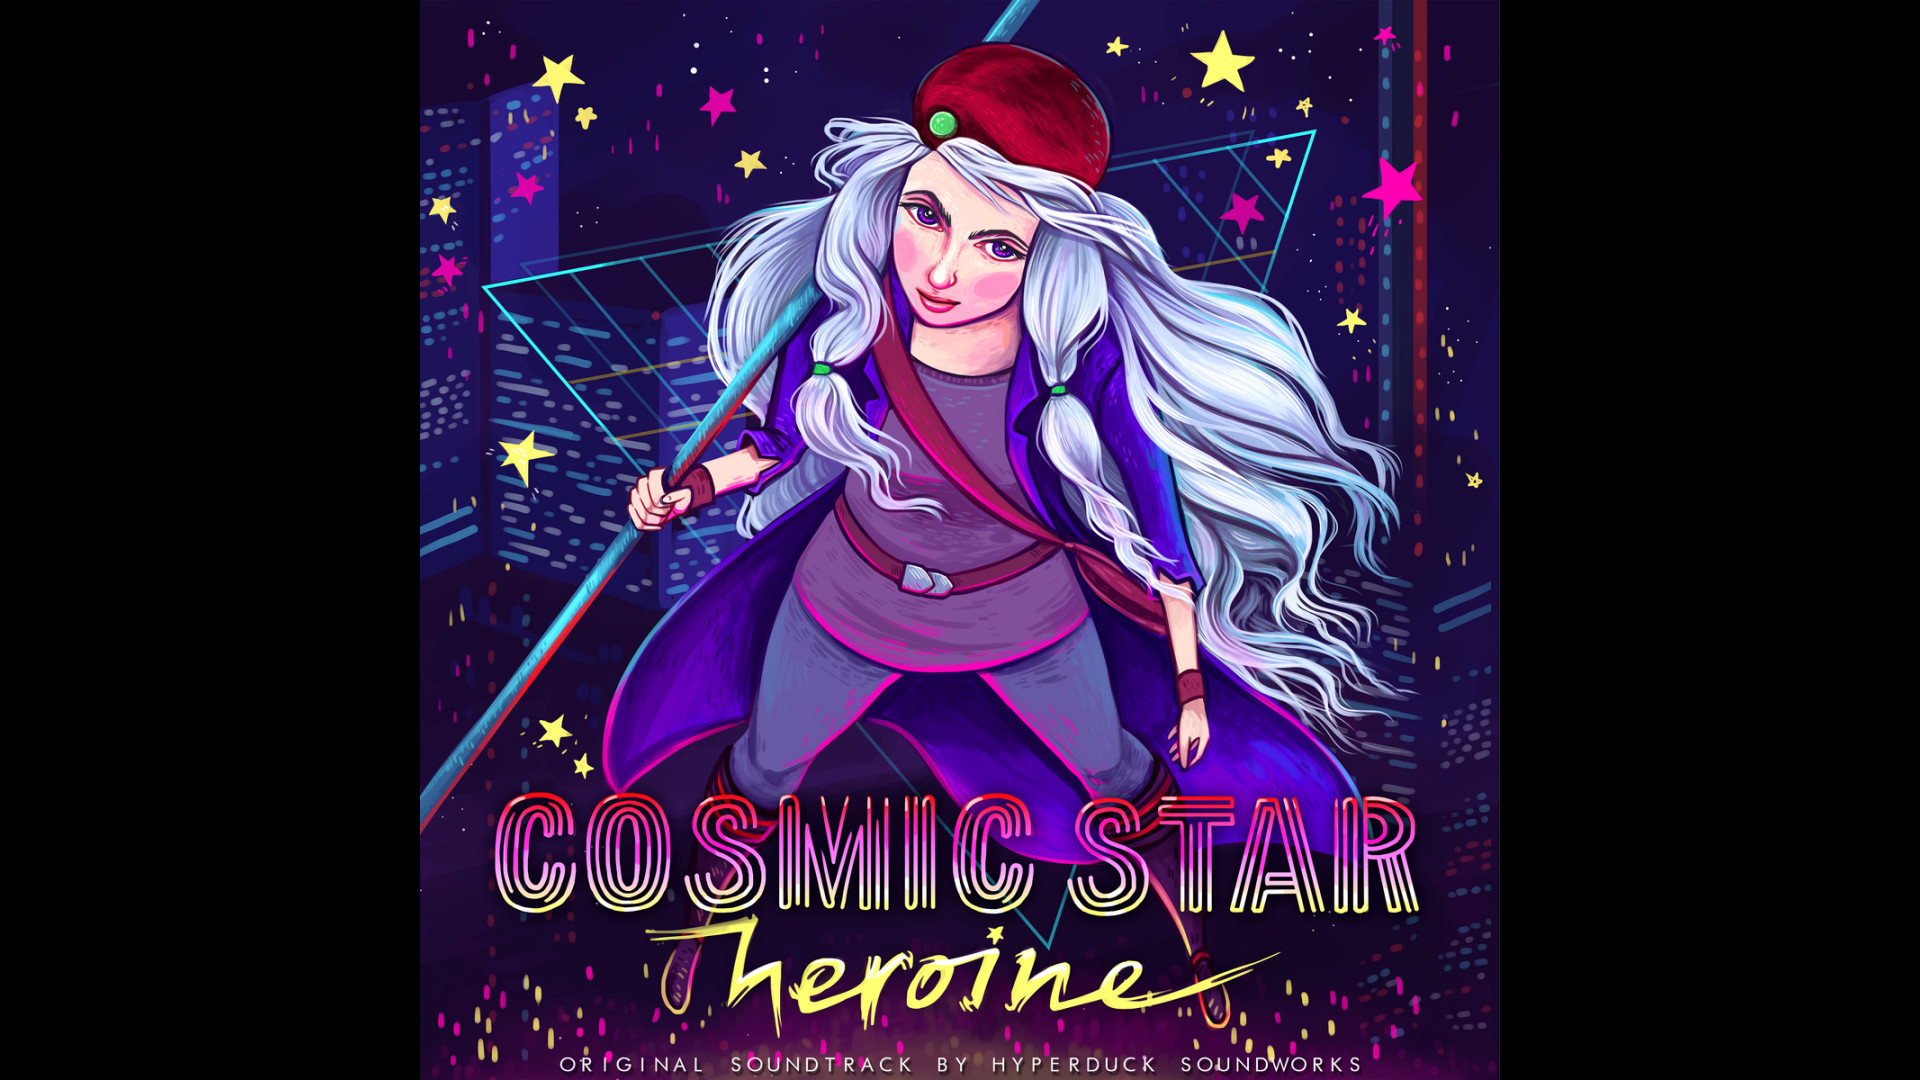 Cosmic Star Heroine Official Soundtrack Featured Screenshot #1